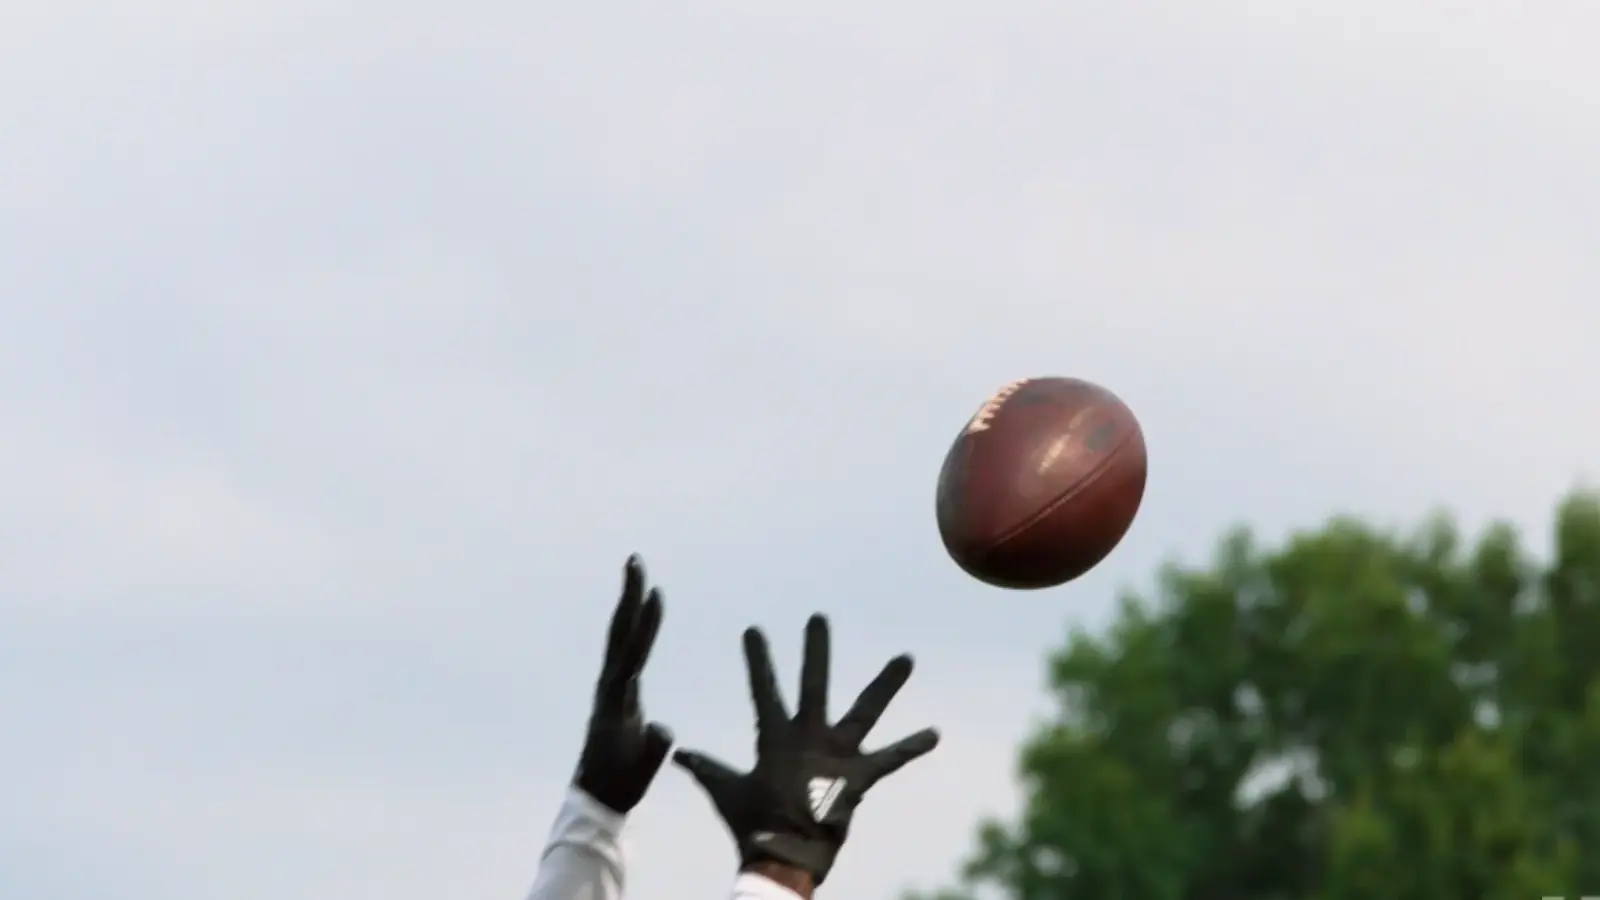 A receiver about to catch the football